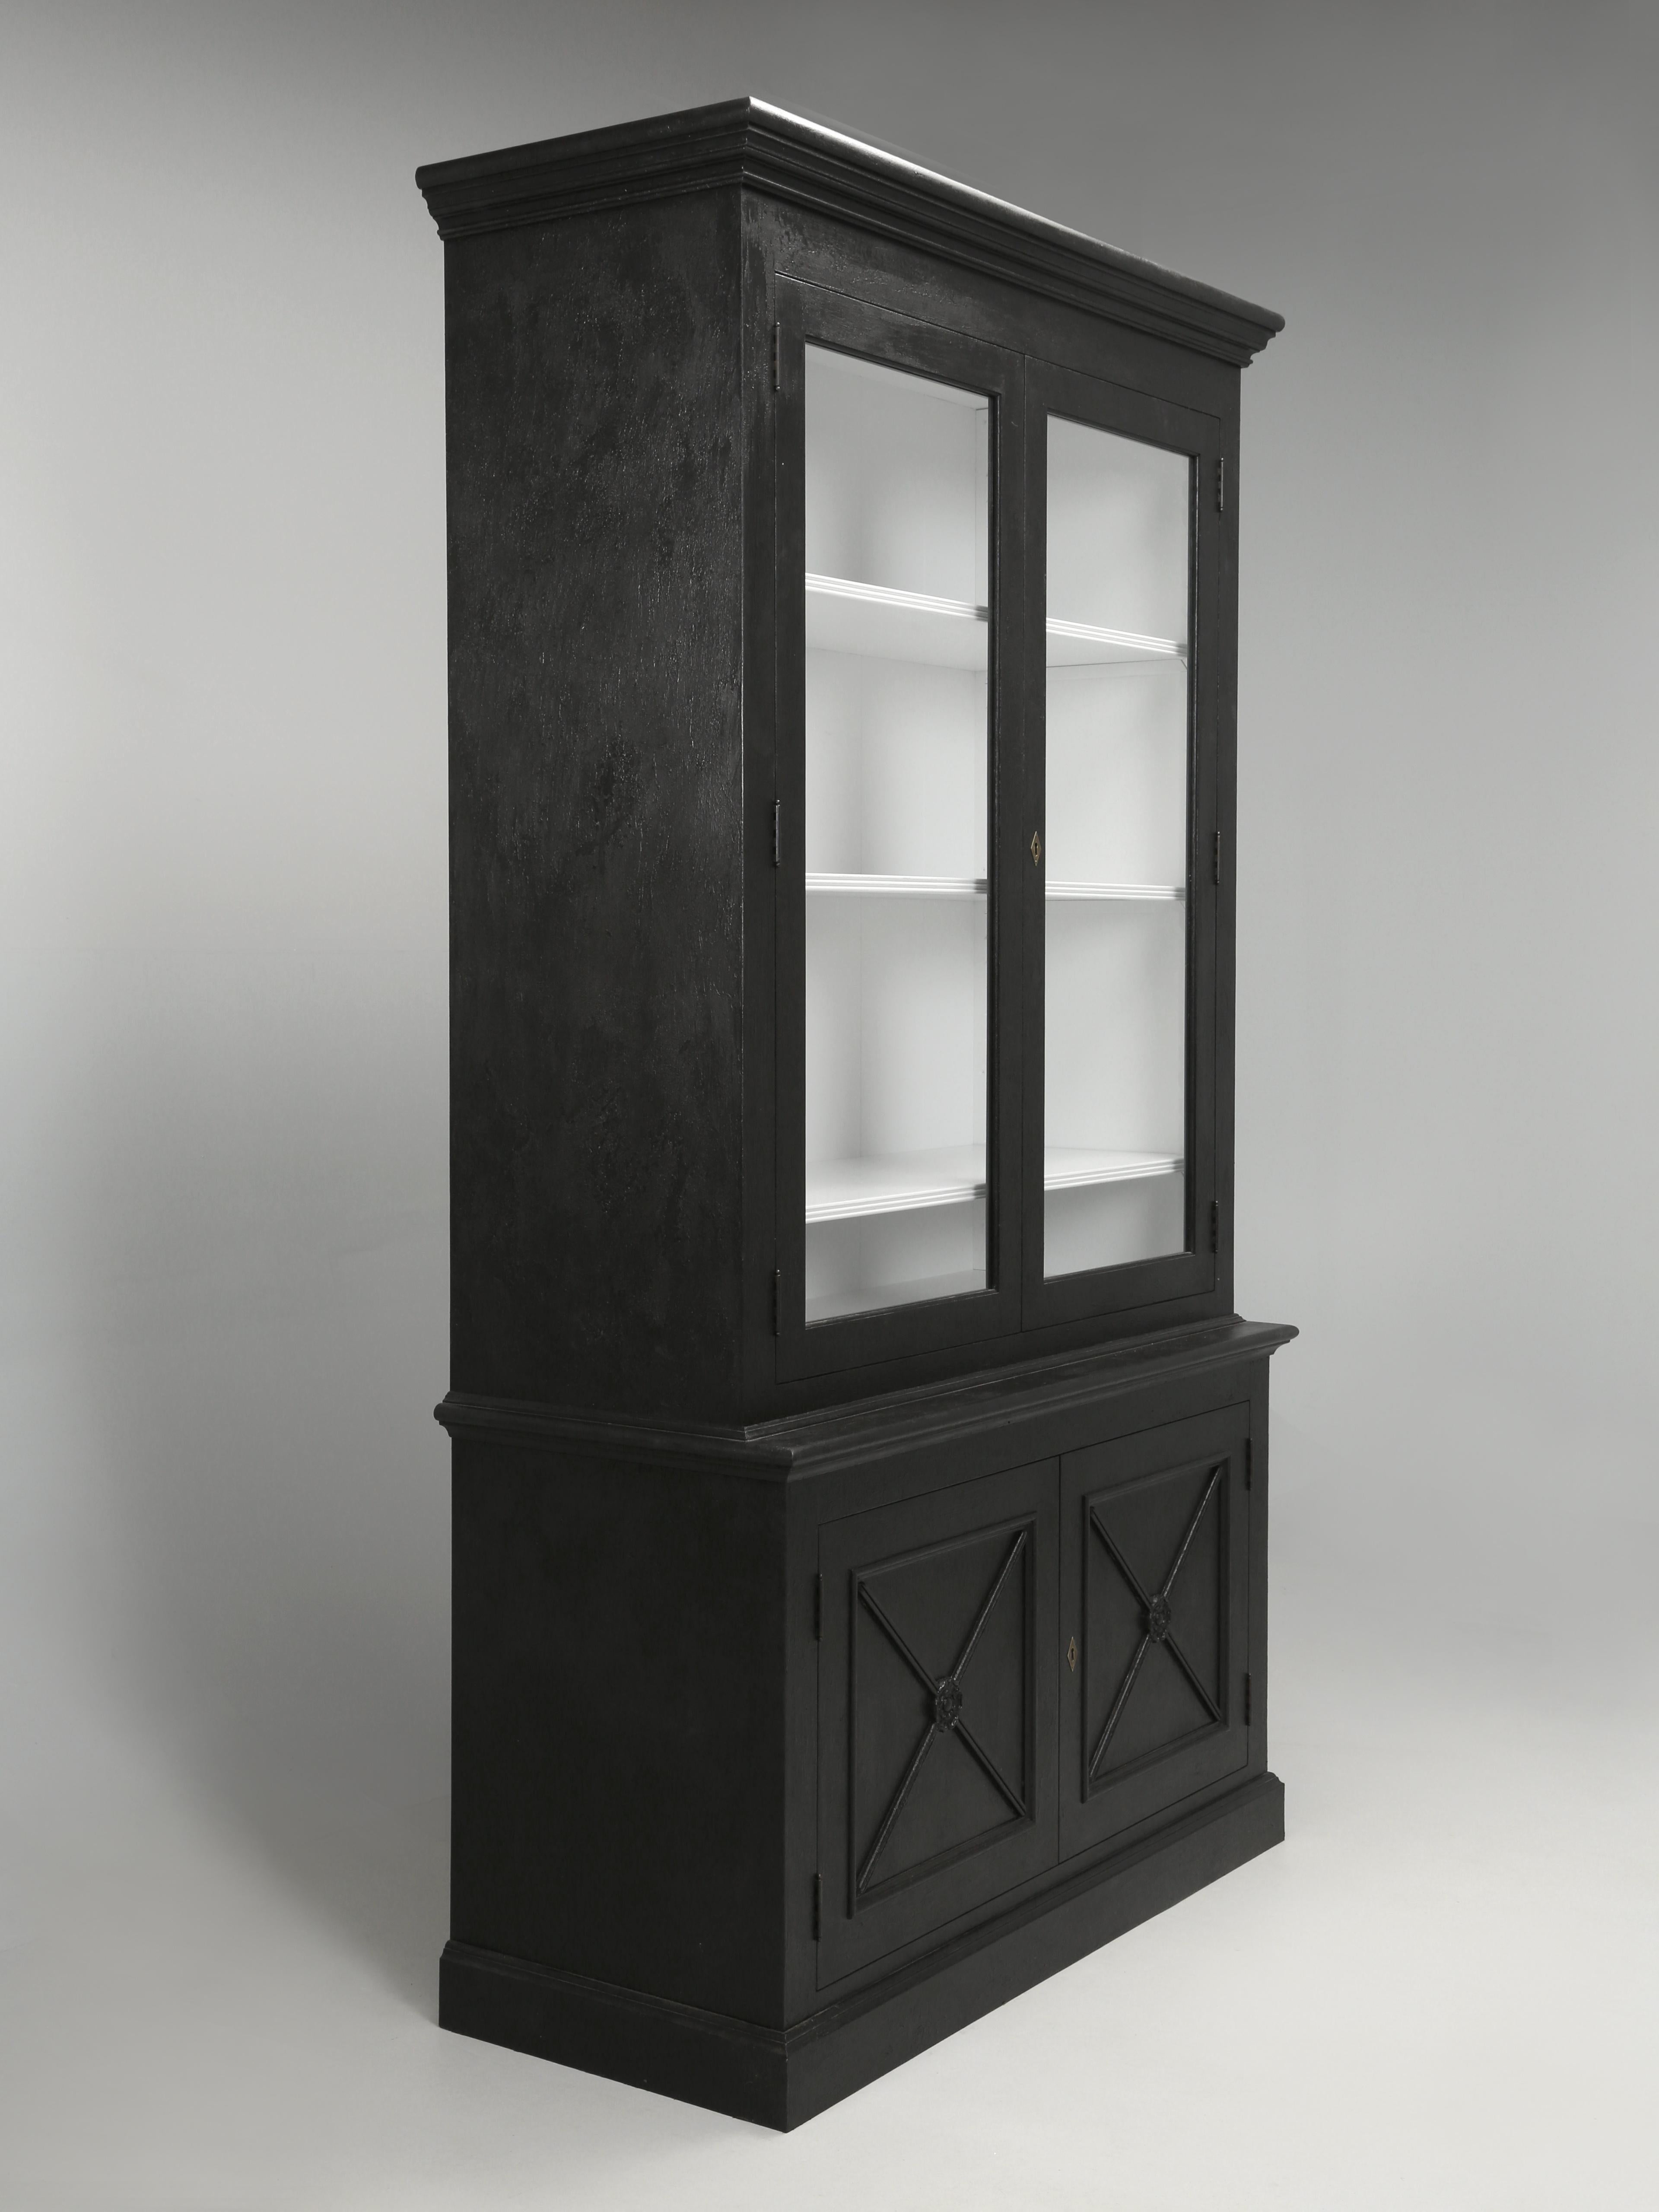 Handmade Country French style glazed bookcase, display cabinet or china cabinet. Our Directoire style bookcase or china cabinet was hand-crafted right here in our Old Plank workshop. As these are custom pieces, you can select your colors inside and